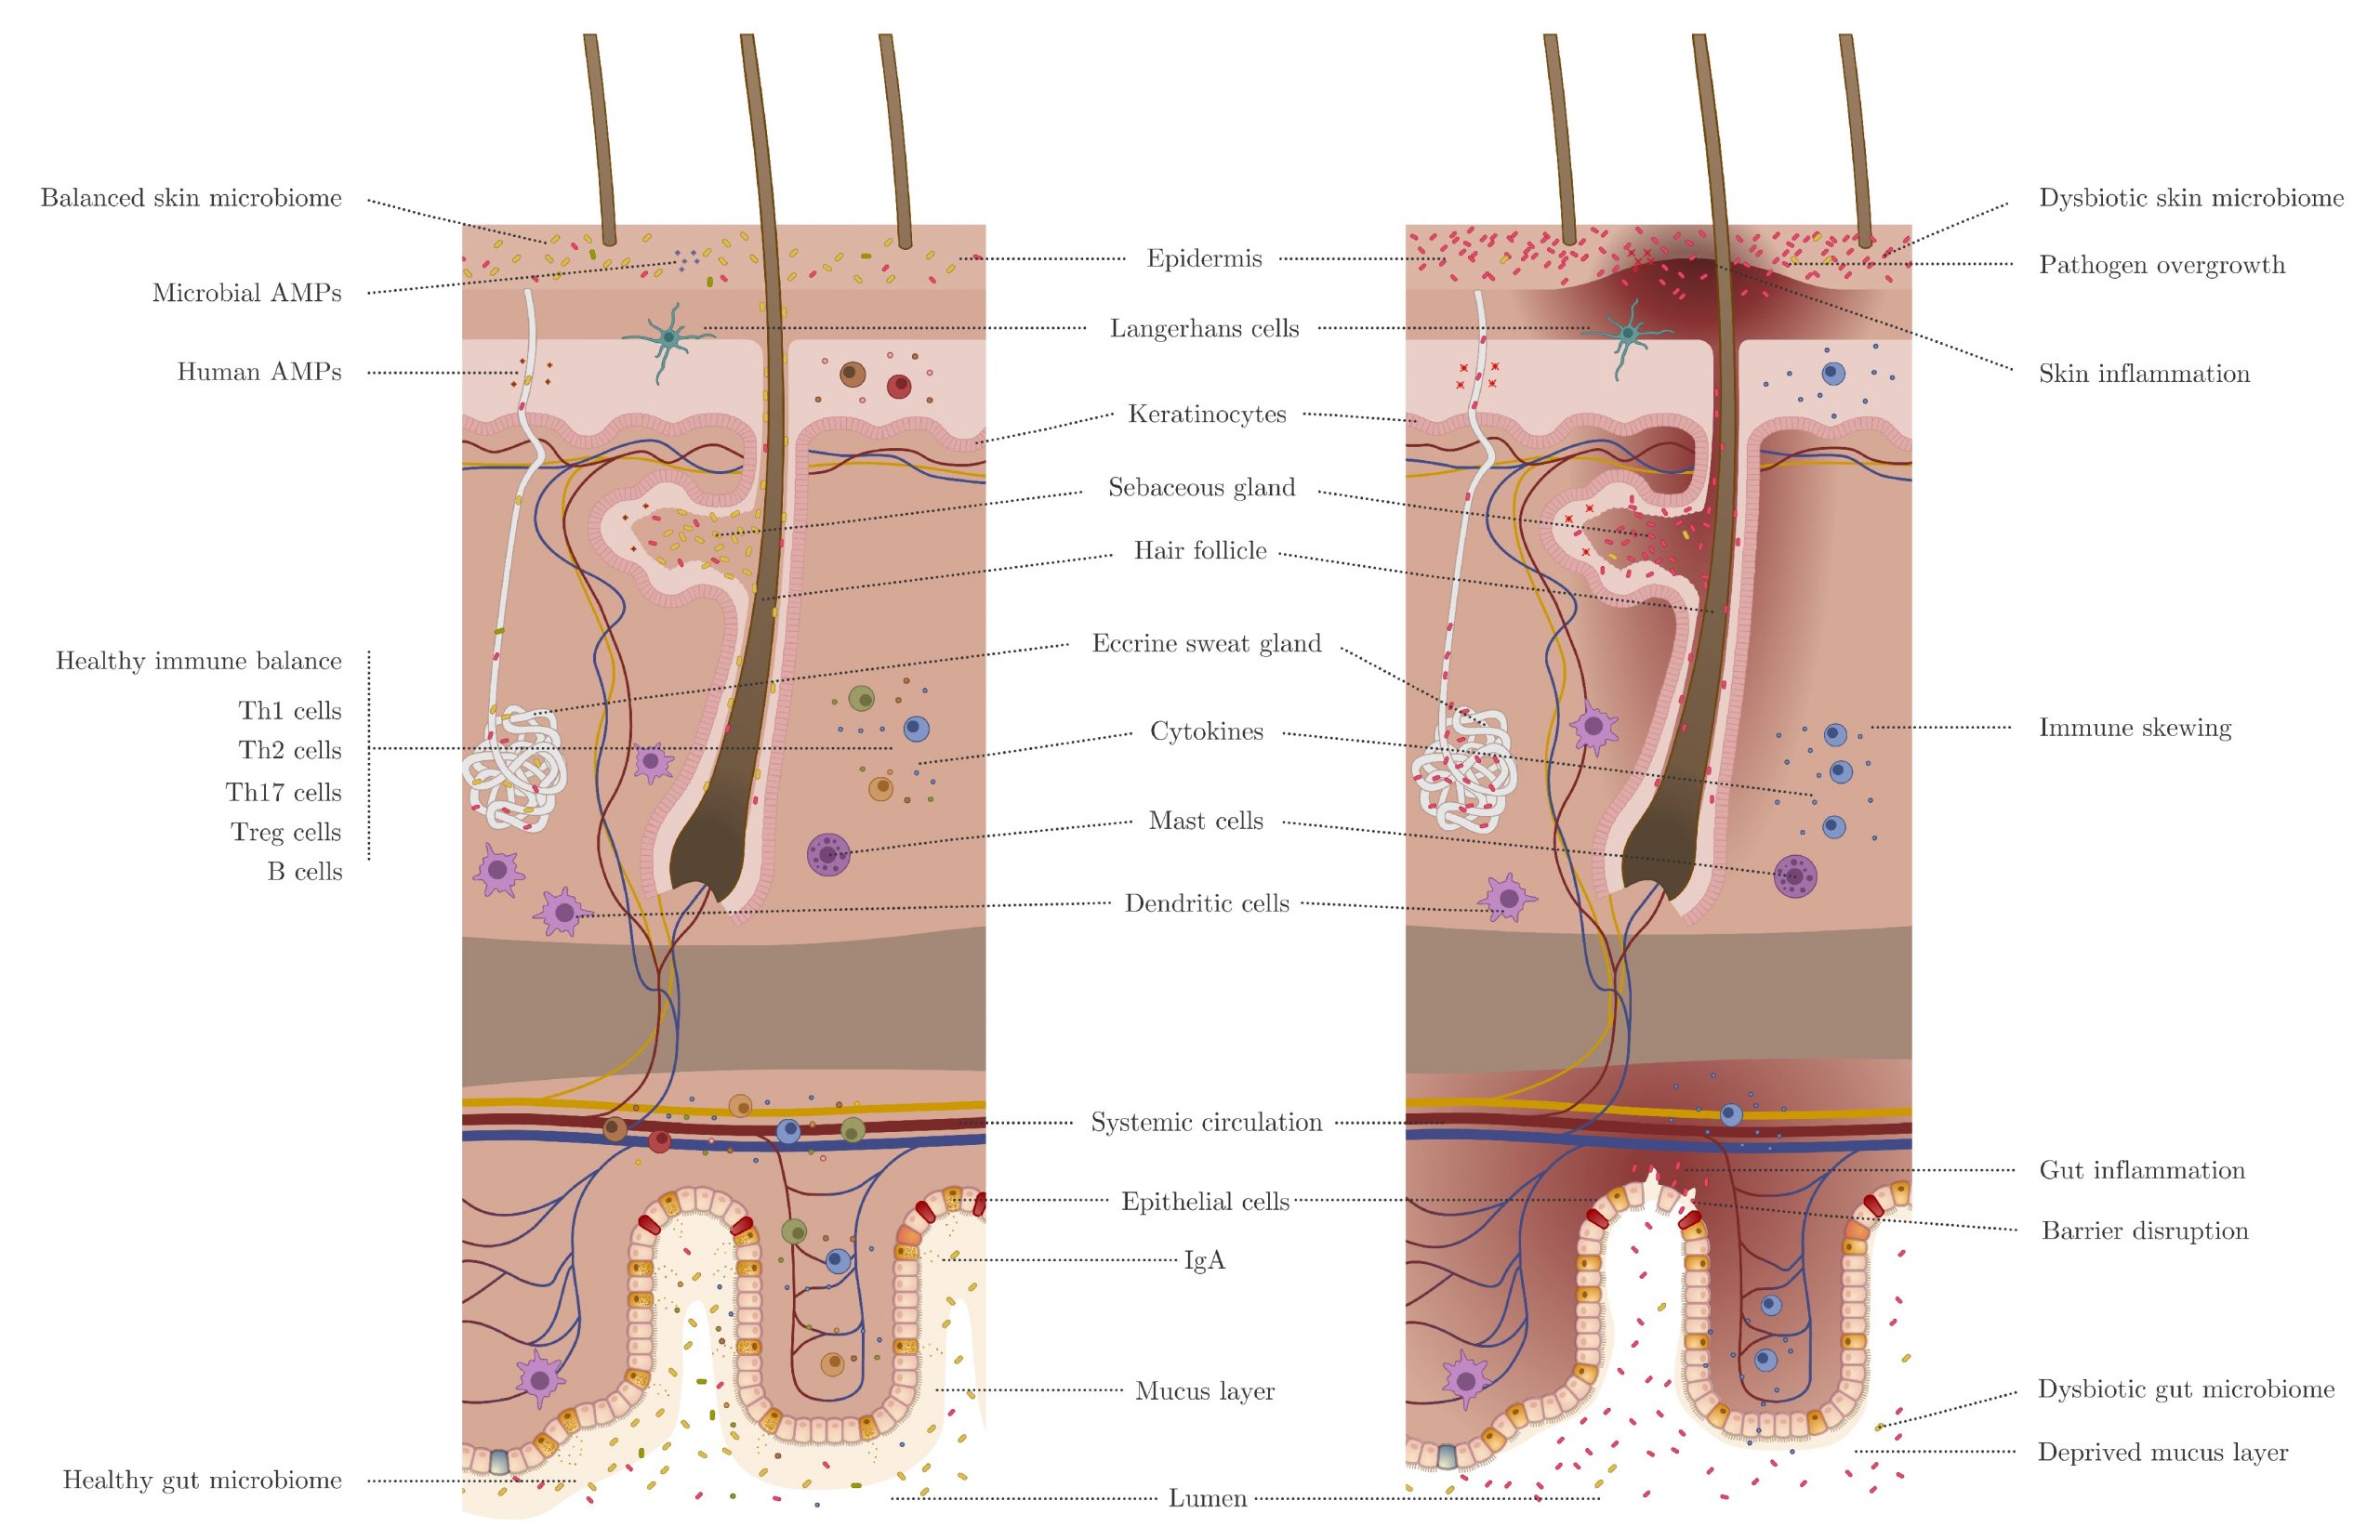 Microbiome and immune system connection between the skin and gut.